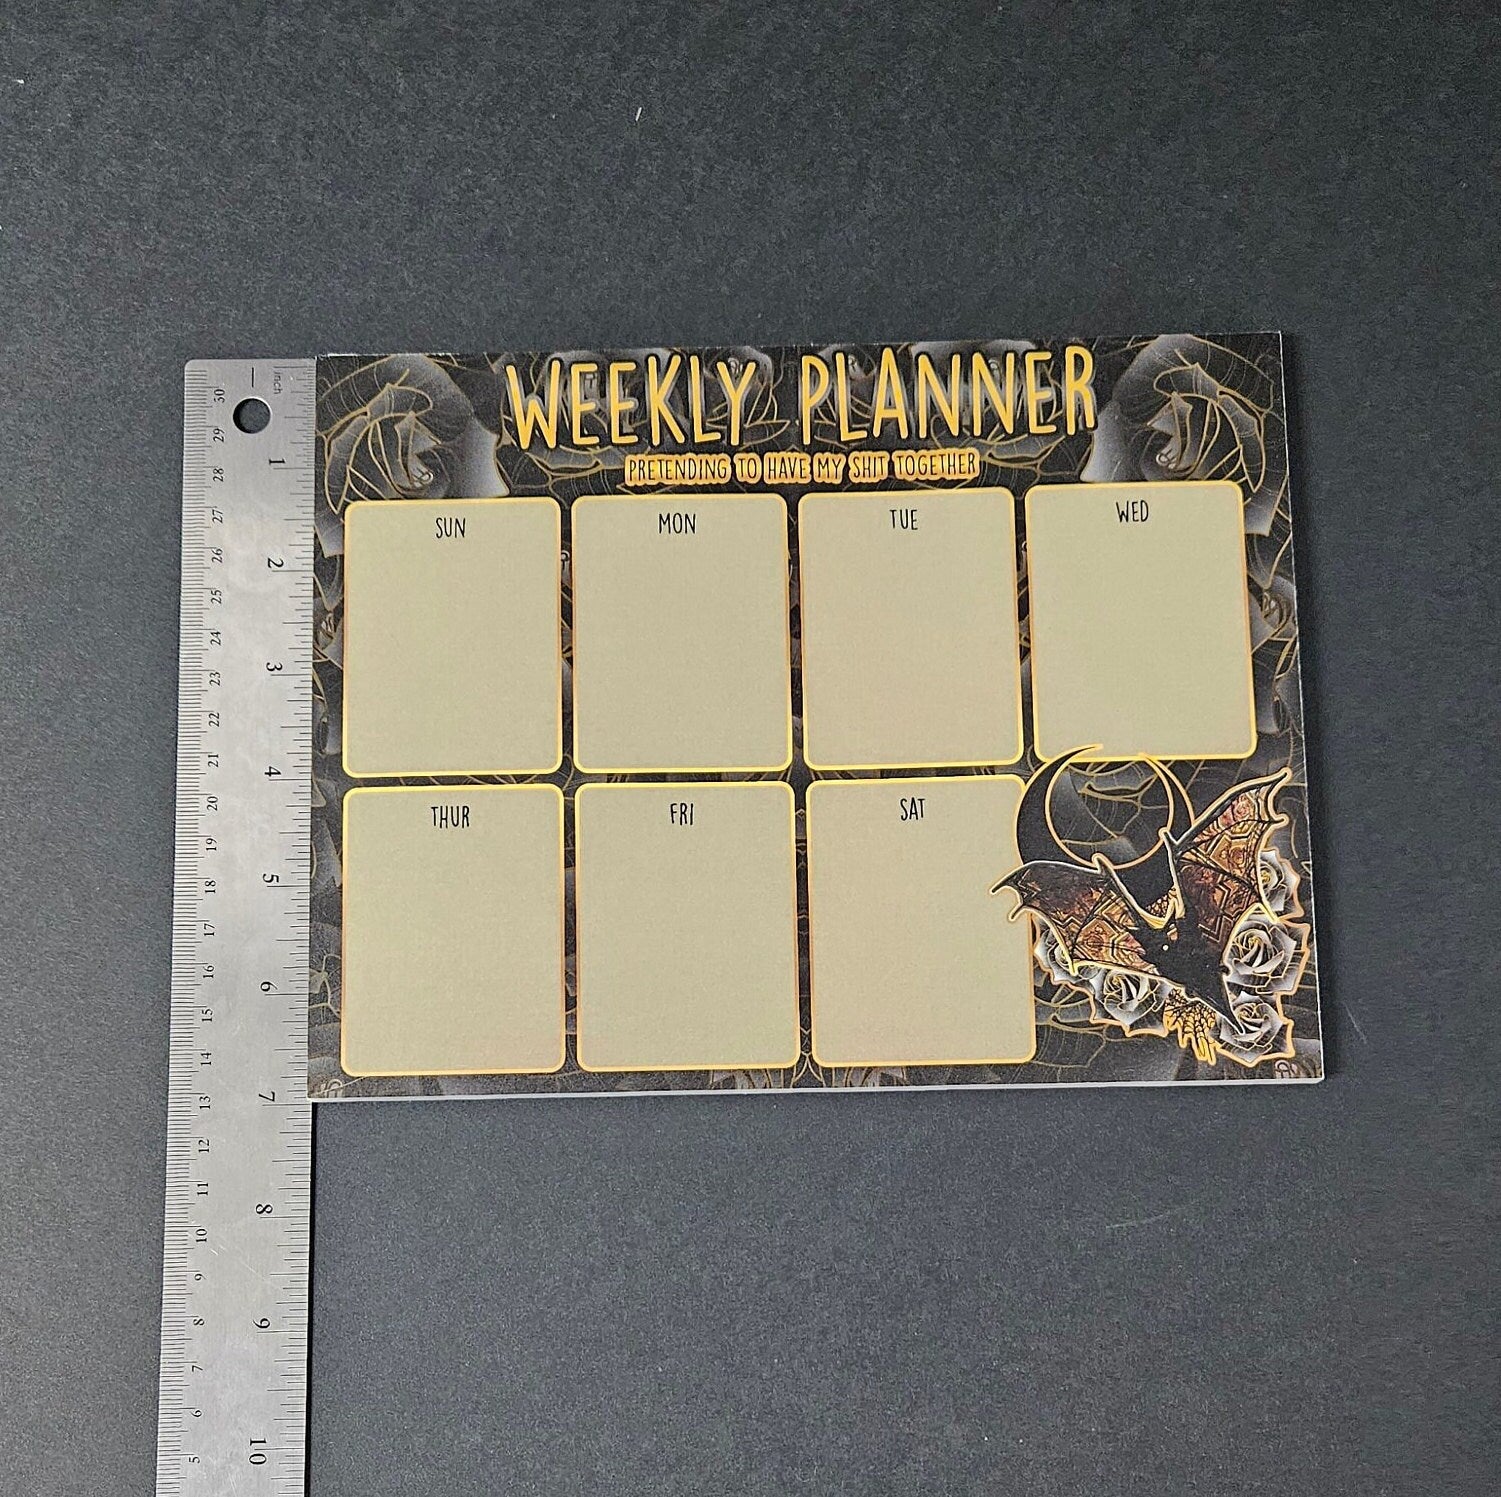 Florence Bat with Black Moon Weekly Planner